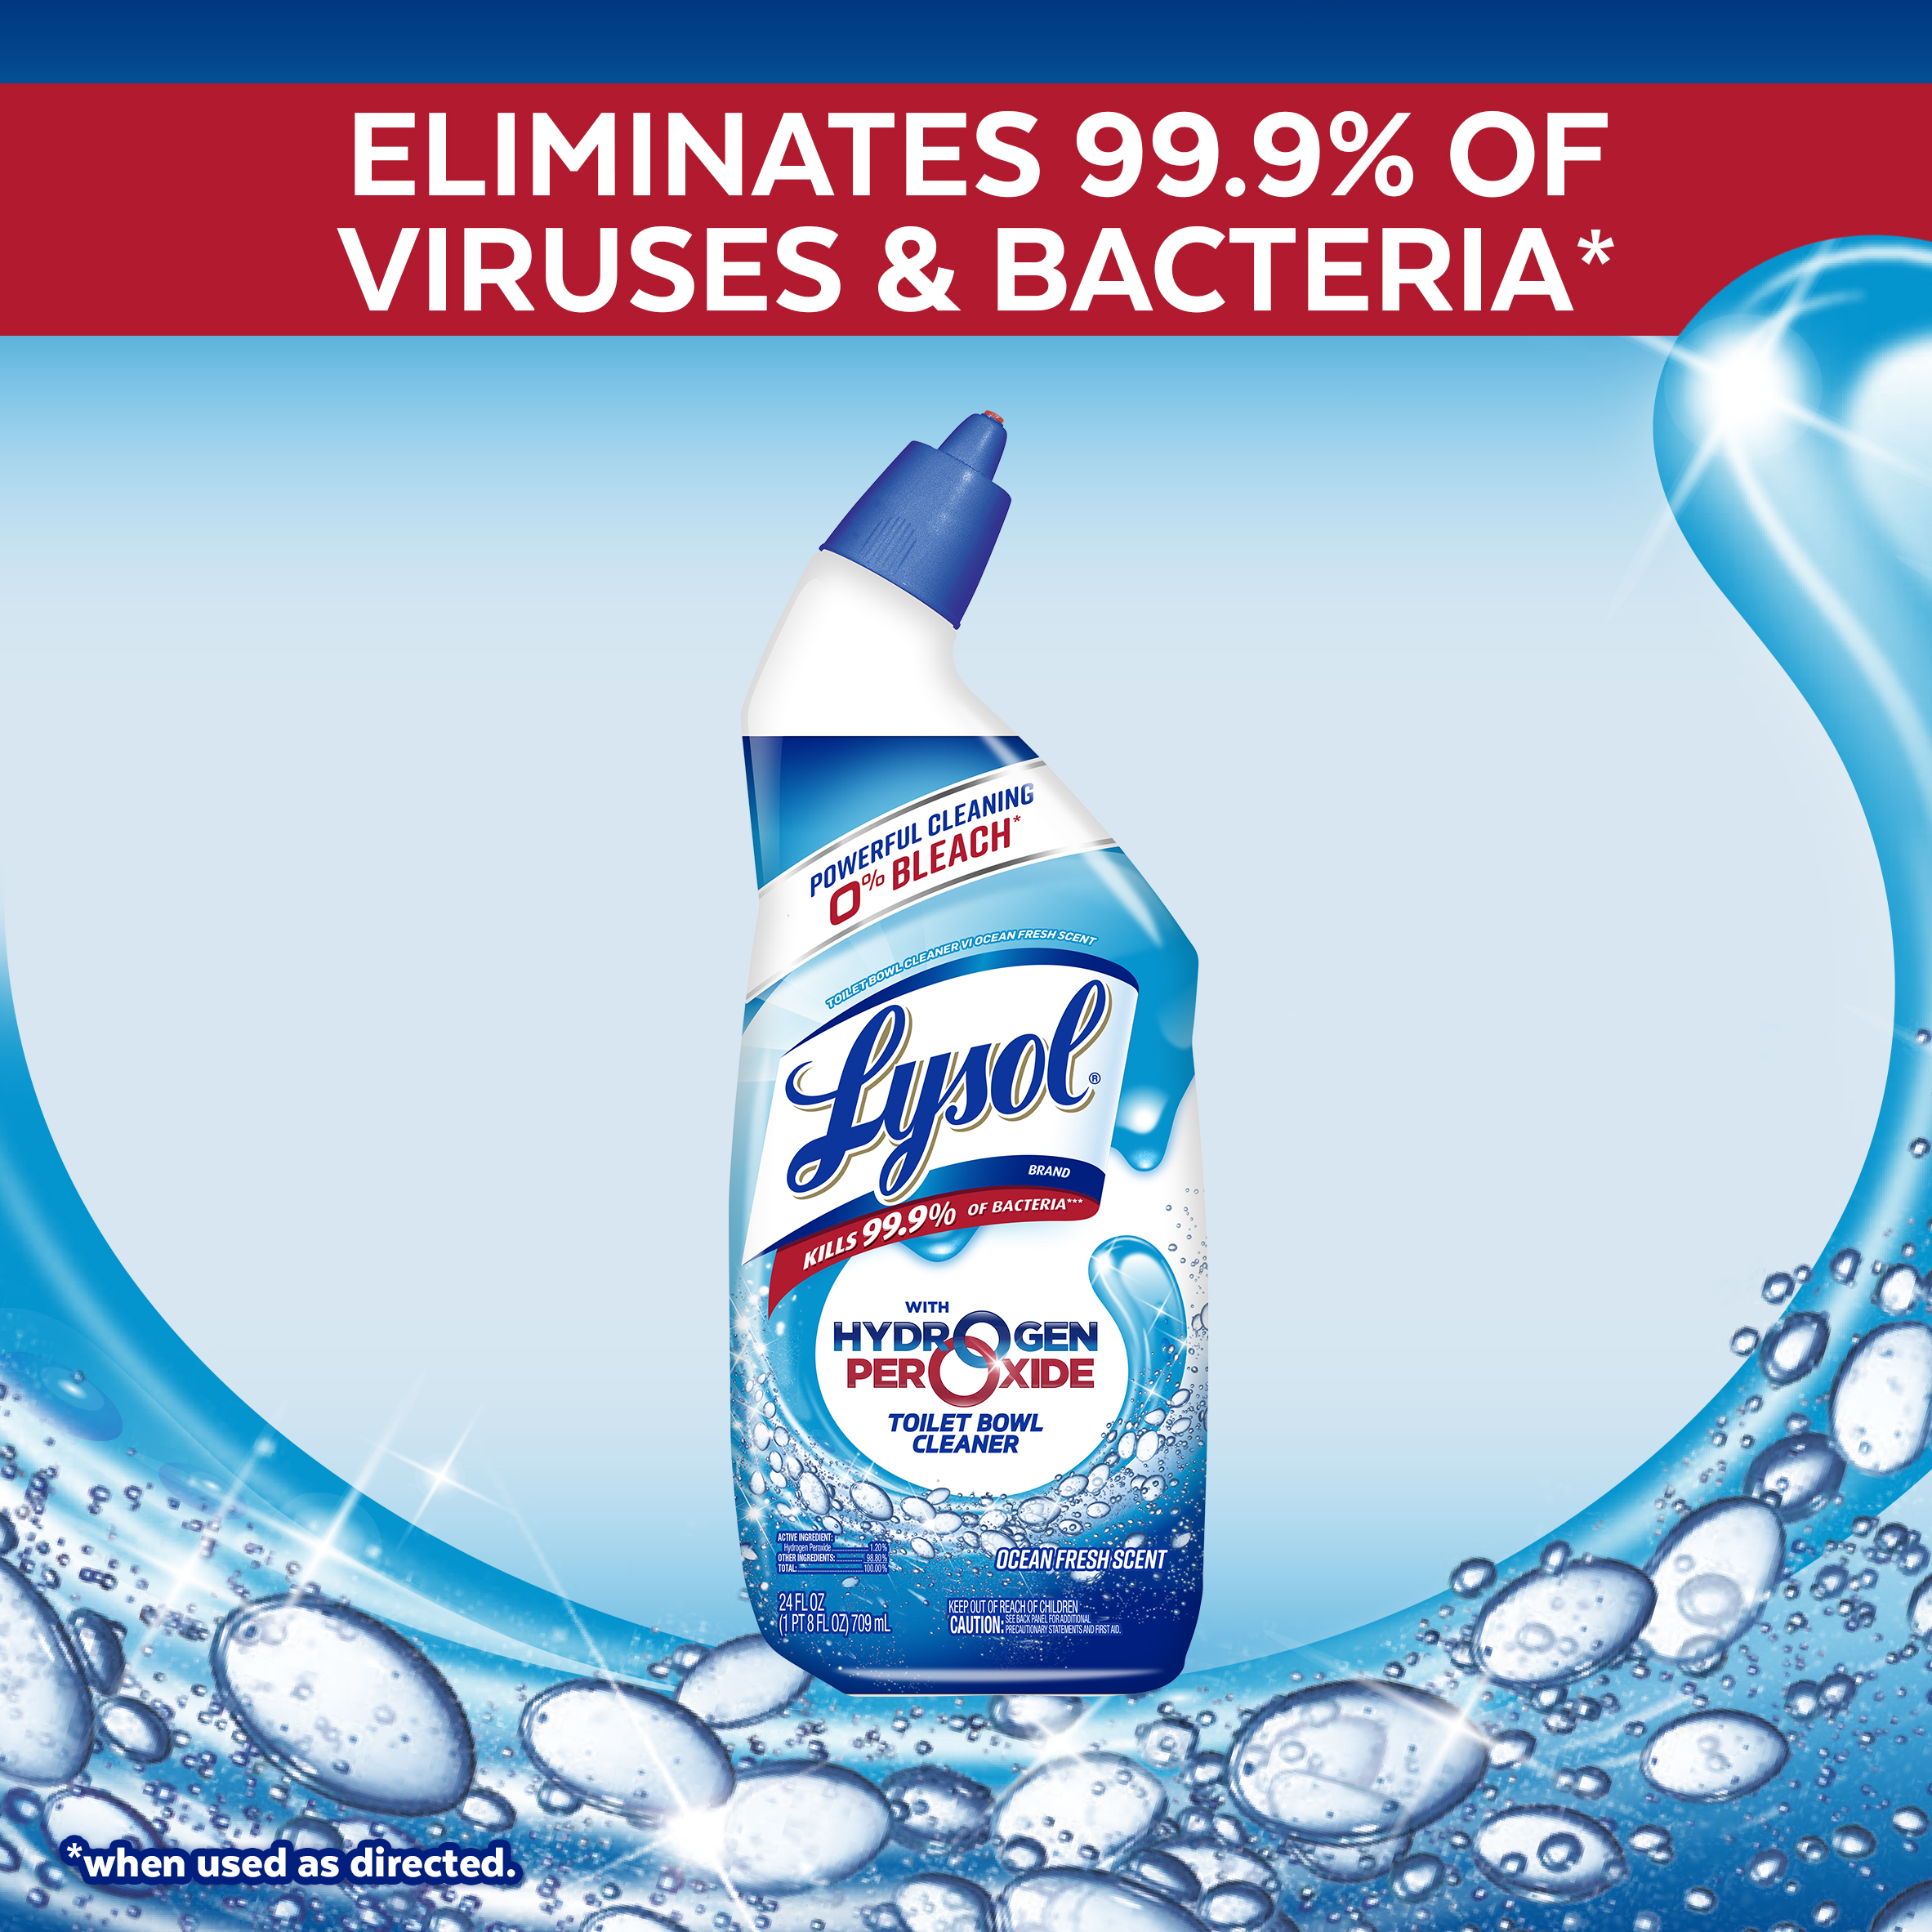 Lysol Toilet Bowl Cleaner Gel, For Cleaning and Disinfecting, Bleach Free (Contains Hydrogen Peroxide), Cool Spring Breeze Scent, 24oz (Pack of 2) - image 3 of 6